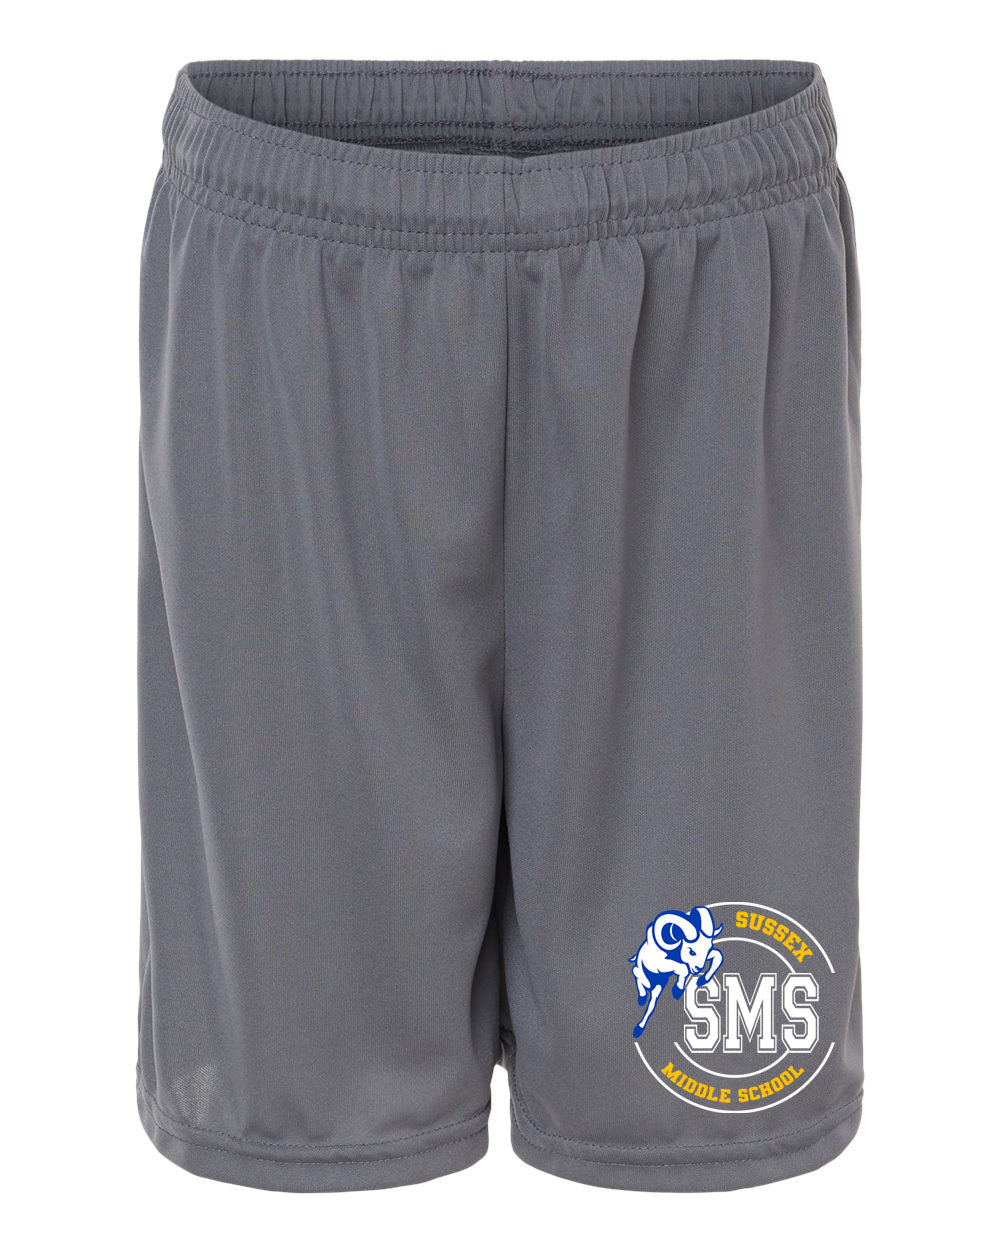 Sussex Middle Design 5 Performance Shorts